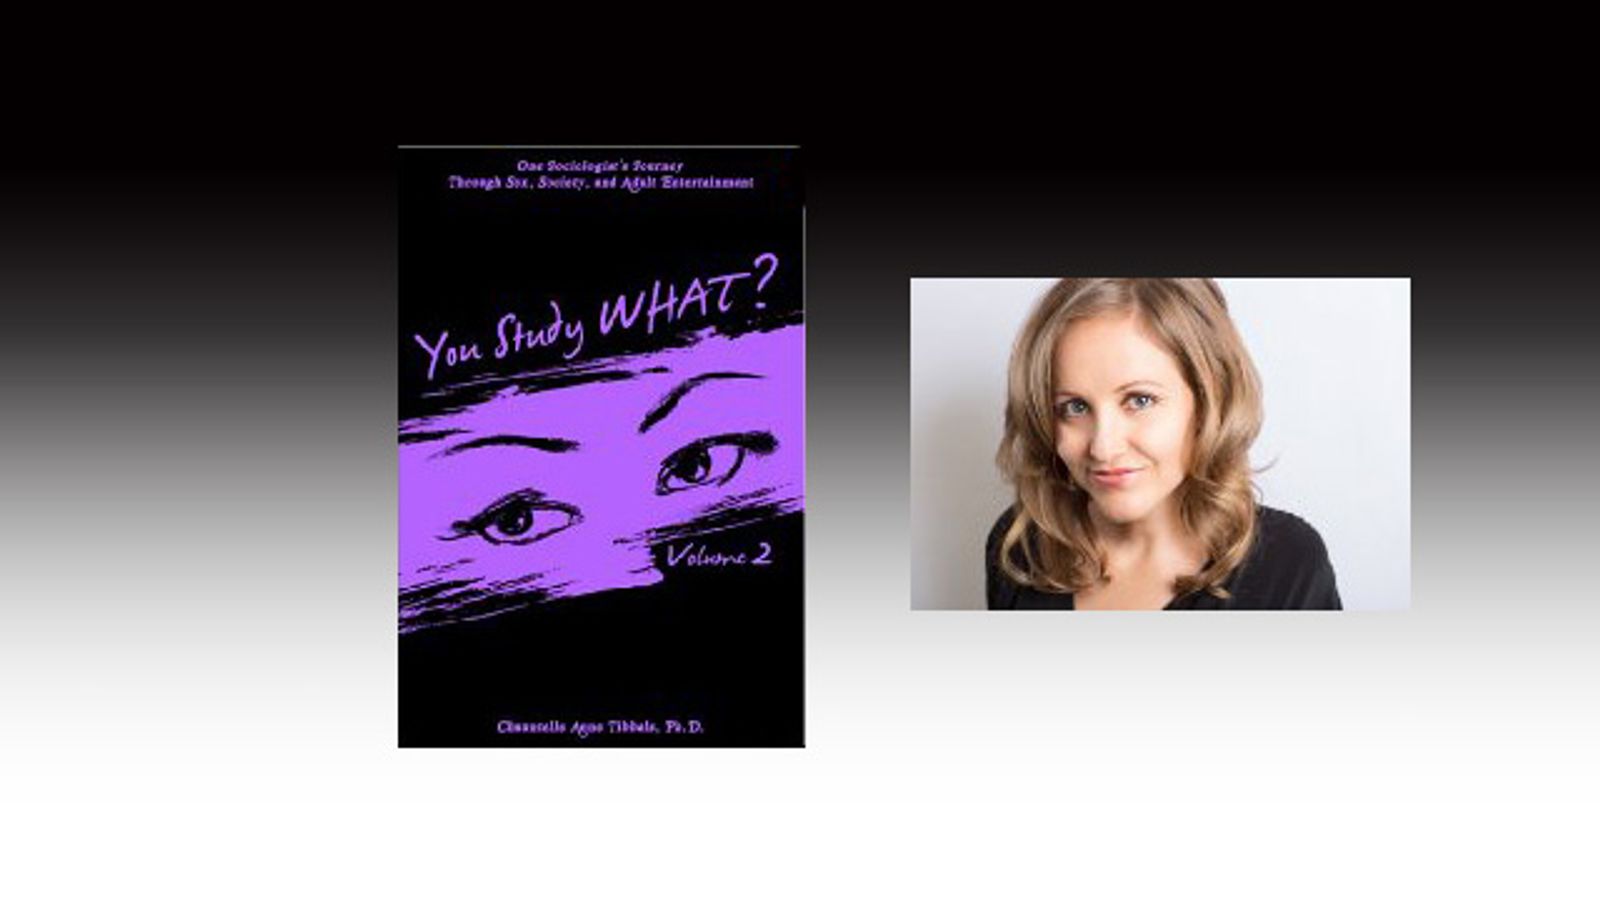 Chauntelle Tibbals Announces 2nd Volume In ‘You Study What?’ Series